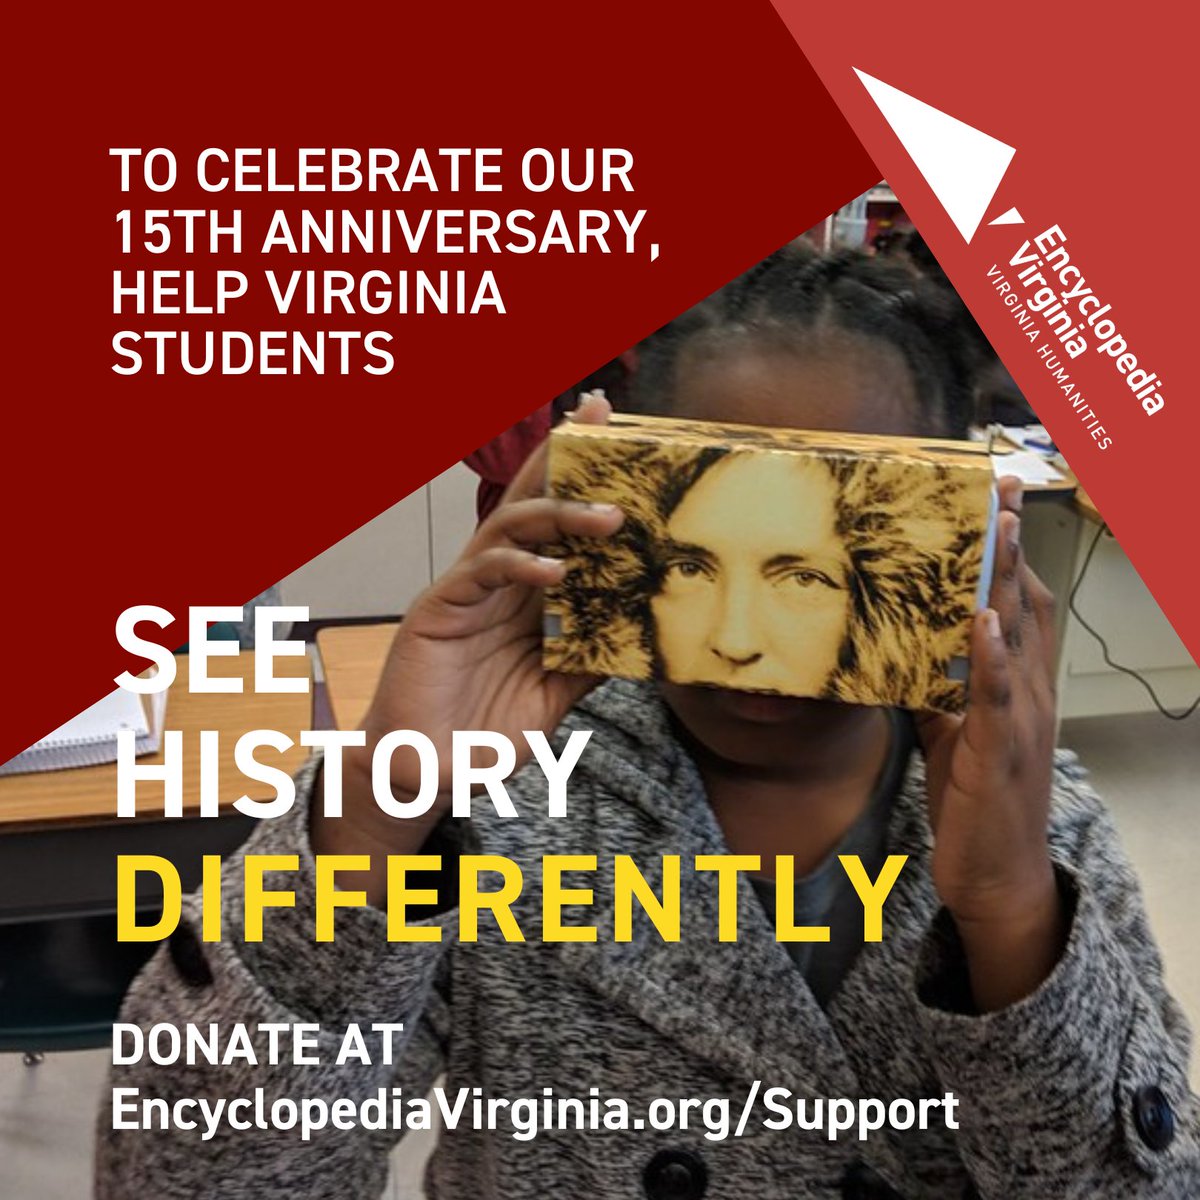 Did you hear? This month, we're setting a goal to raise $10,000 to support free, reliable access to Virginia history. Learn more here: loom.ly/Lka7yD8